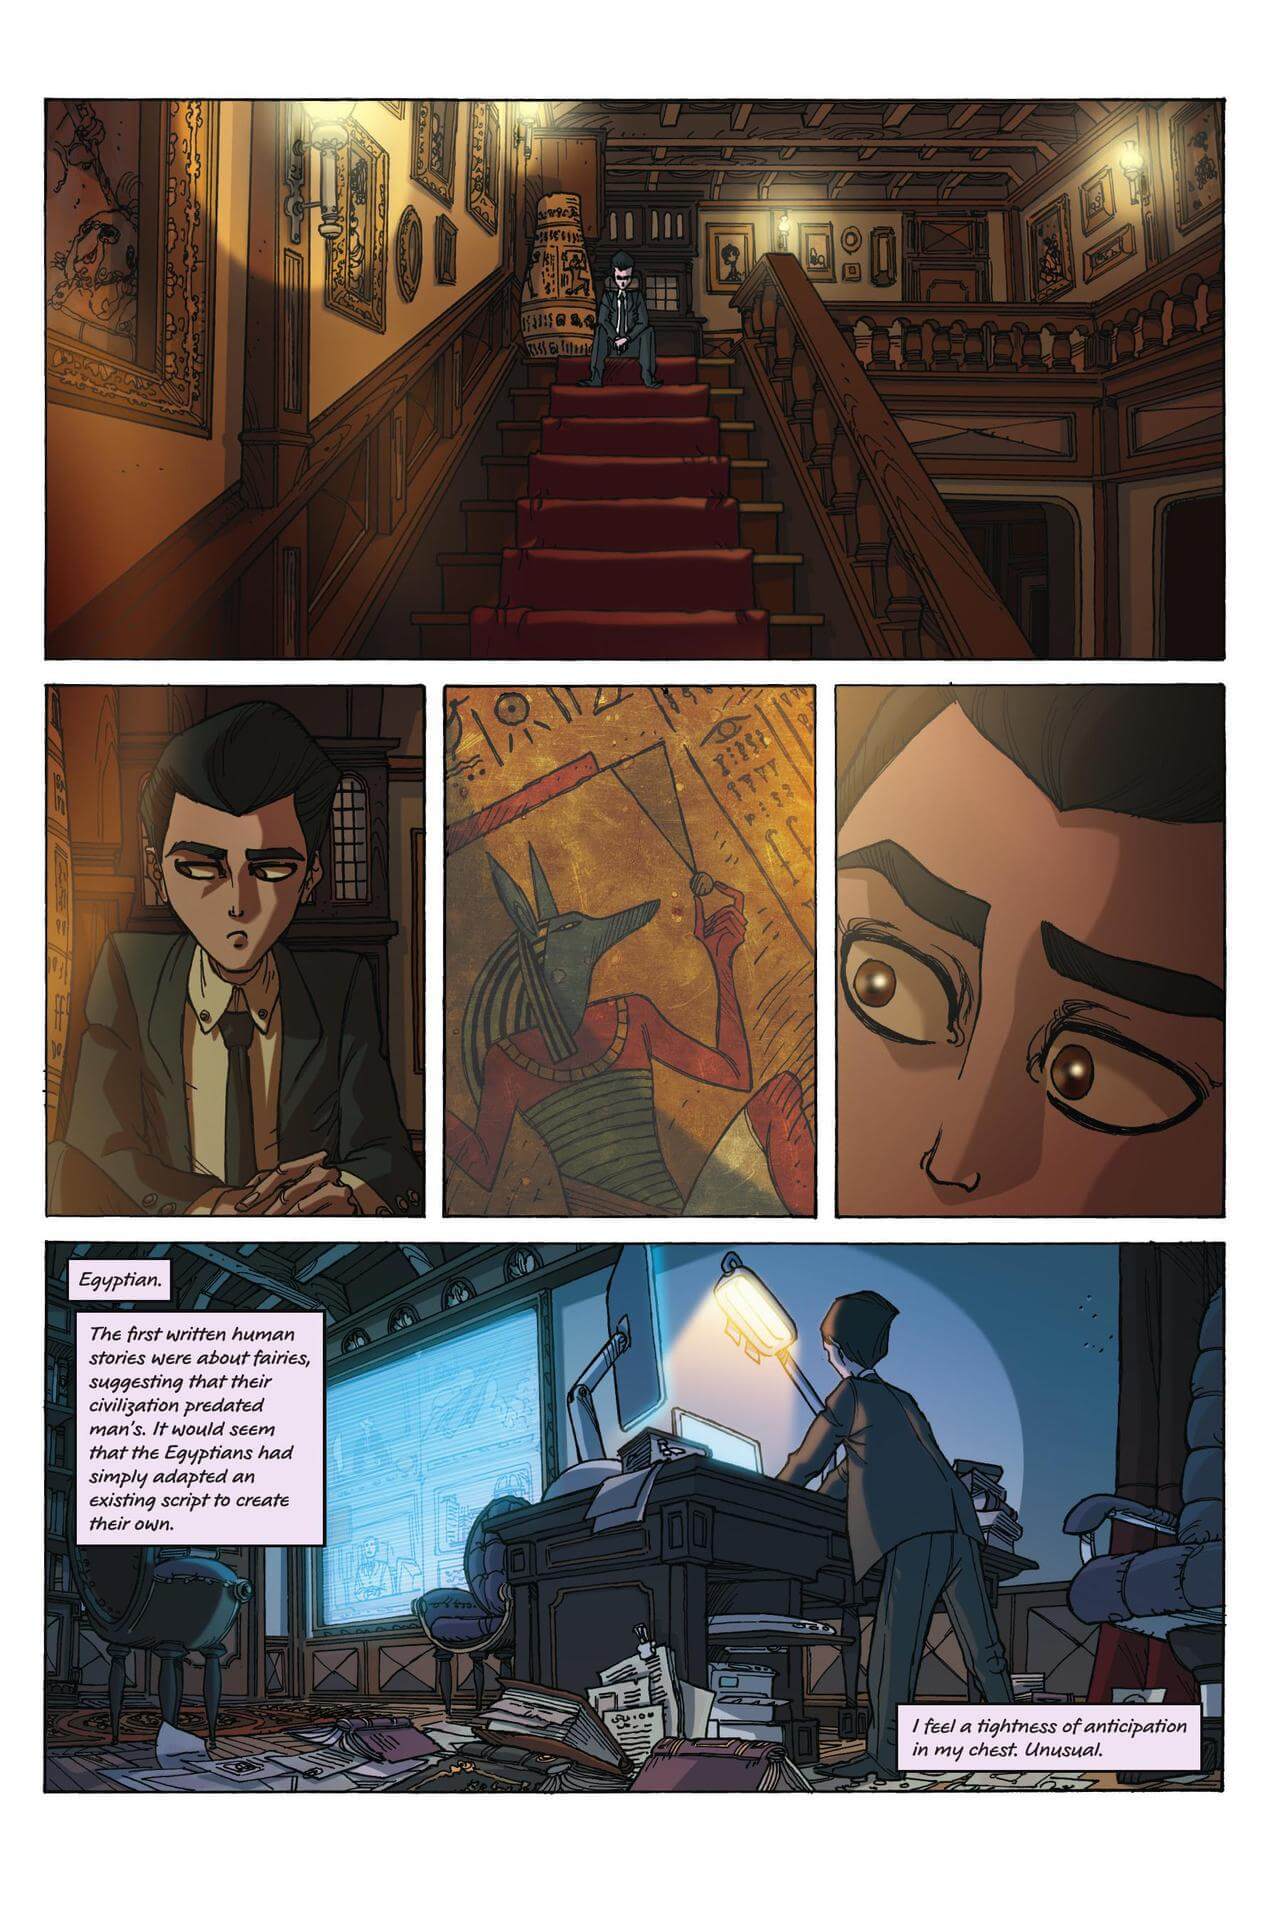 page 13 of artemis fowl the graphic novel